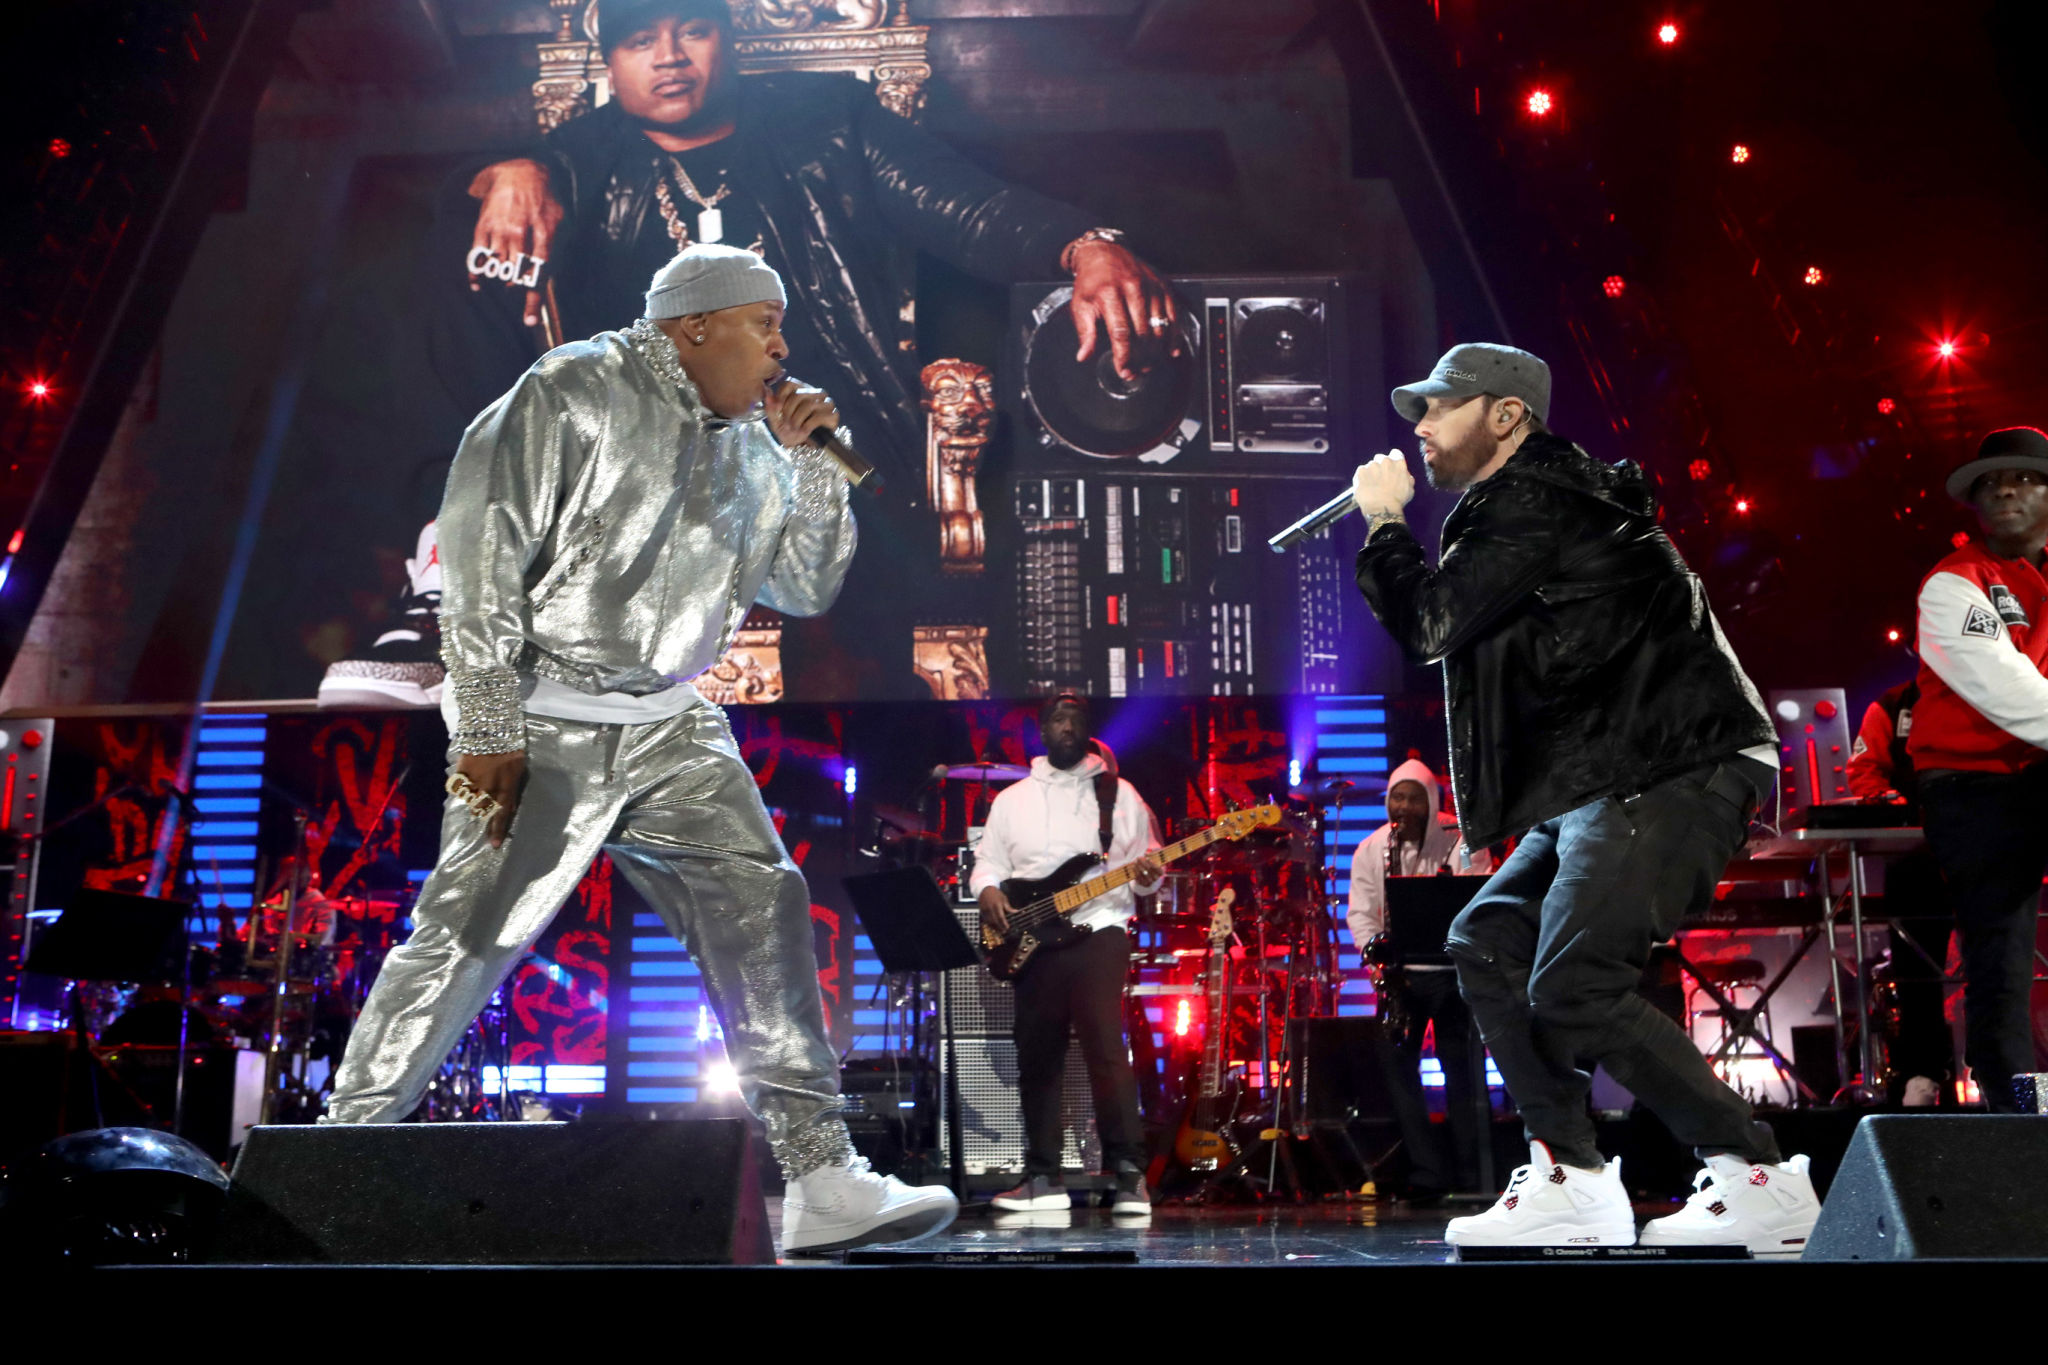 CLEVELAND, OHIO - OCTOBER 30: LL Cool J and Eminem perform onstage during the 36th Annual Rock & Roll Hall Of Fame Induction Ceremony at Rocket Mortgage Fieldhouse on October 30, 2021 in Cleveland, Ohio. (Photo by Kevin Kane/Getty Images for The Rock and Roll Hall of Fame )